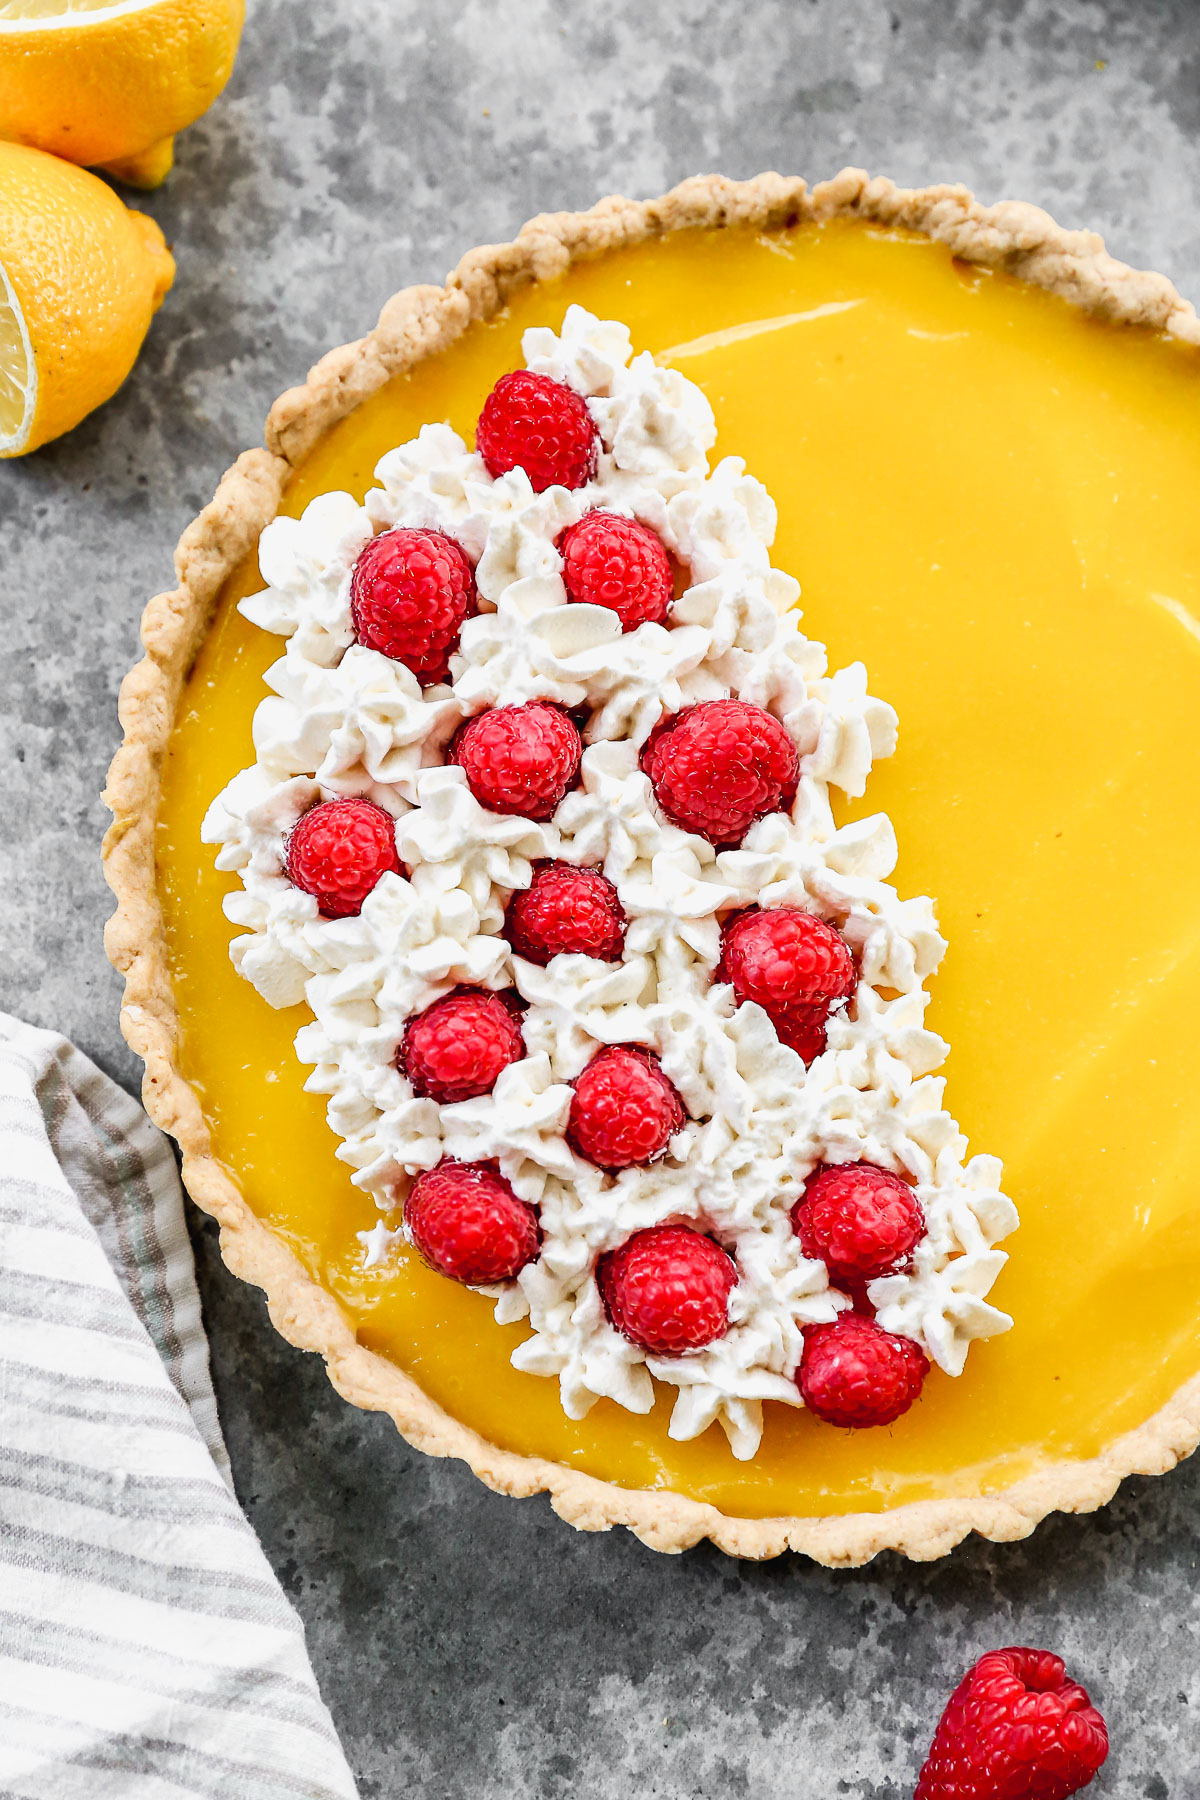 easy lemon tart with berries and cream topping